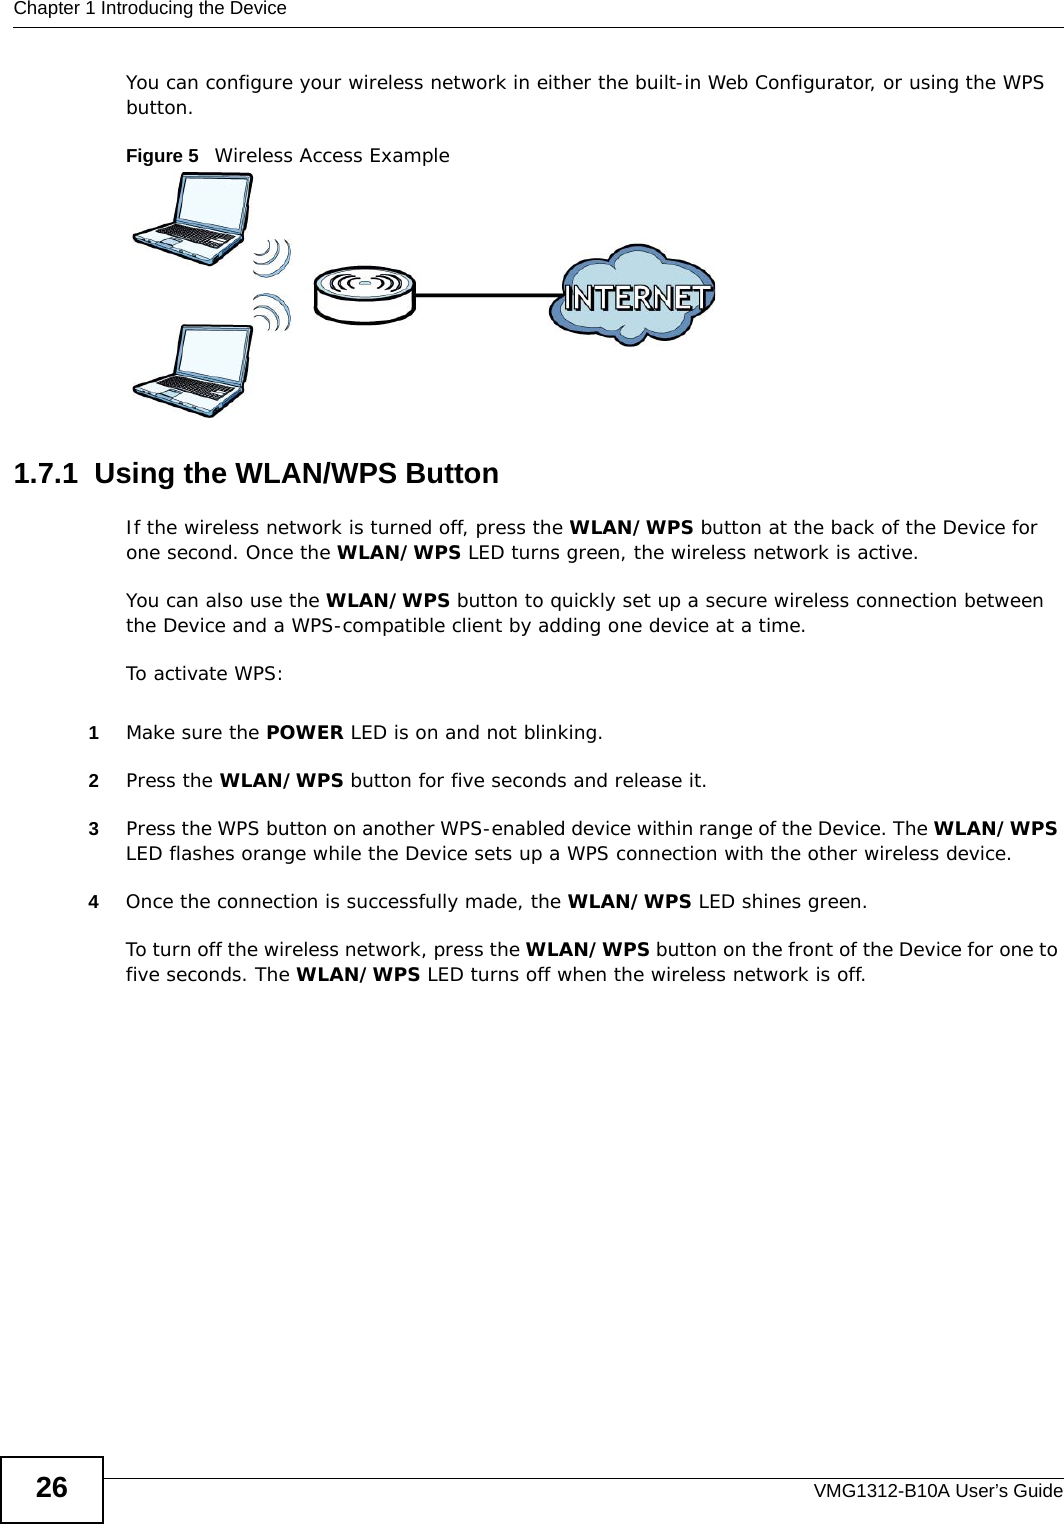 Chapter 1 Introducing the DeviceVMG1312-B10A User’s Guide26You can configure your wireless network in either the built-in Web Configurator, or using the WPS button.Figure 5   Wireless Access Example1.7.1  Using the WLAN/WPS ButtonIf the wireless network is turned off, press the WLAN/WPS button at the back of the Device for one second. Once the WLAN/WPS LED turns green, the wireless network is active.You can also use the WLAN/WPS button to quickly set up a secure wireless connection between the Device and a WPS-compatible client by adding one device at a time.To activate WPS:1Make sure the POWER LED is on and not blinking.2Press the WLAN/WPS button for five seconds and release it.3Press the WPS button on another WPS-enabled device within range of the Device. The WLAN/WPS LED flashes orange while the Device sets up a WPS connection with the other wireless device. 4Once the connection is successfully made, the WLAN/WPS LED shines green.To turn off the wireless network, press the WLAN/WPS button on the front of the Device for one to five seconds. The WLAN/WPS LED turns off when the wireless network is off.